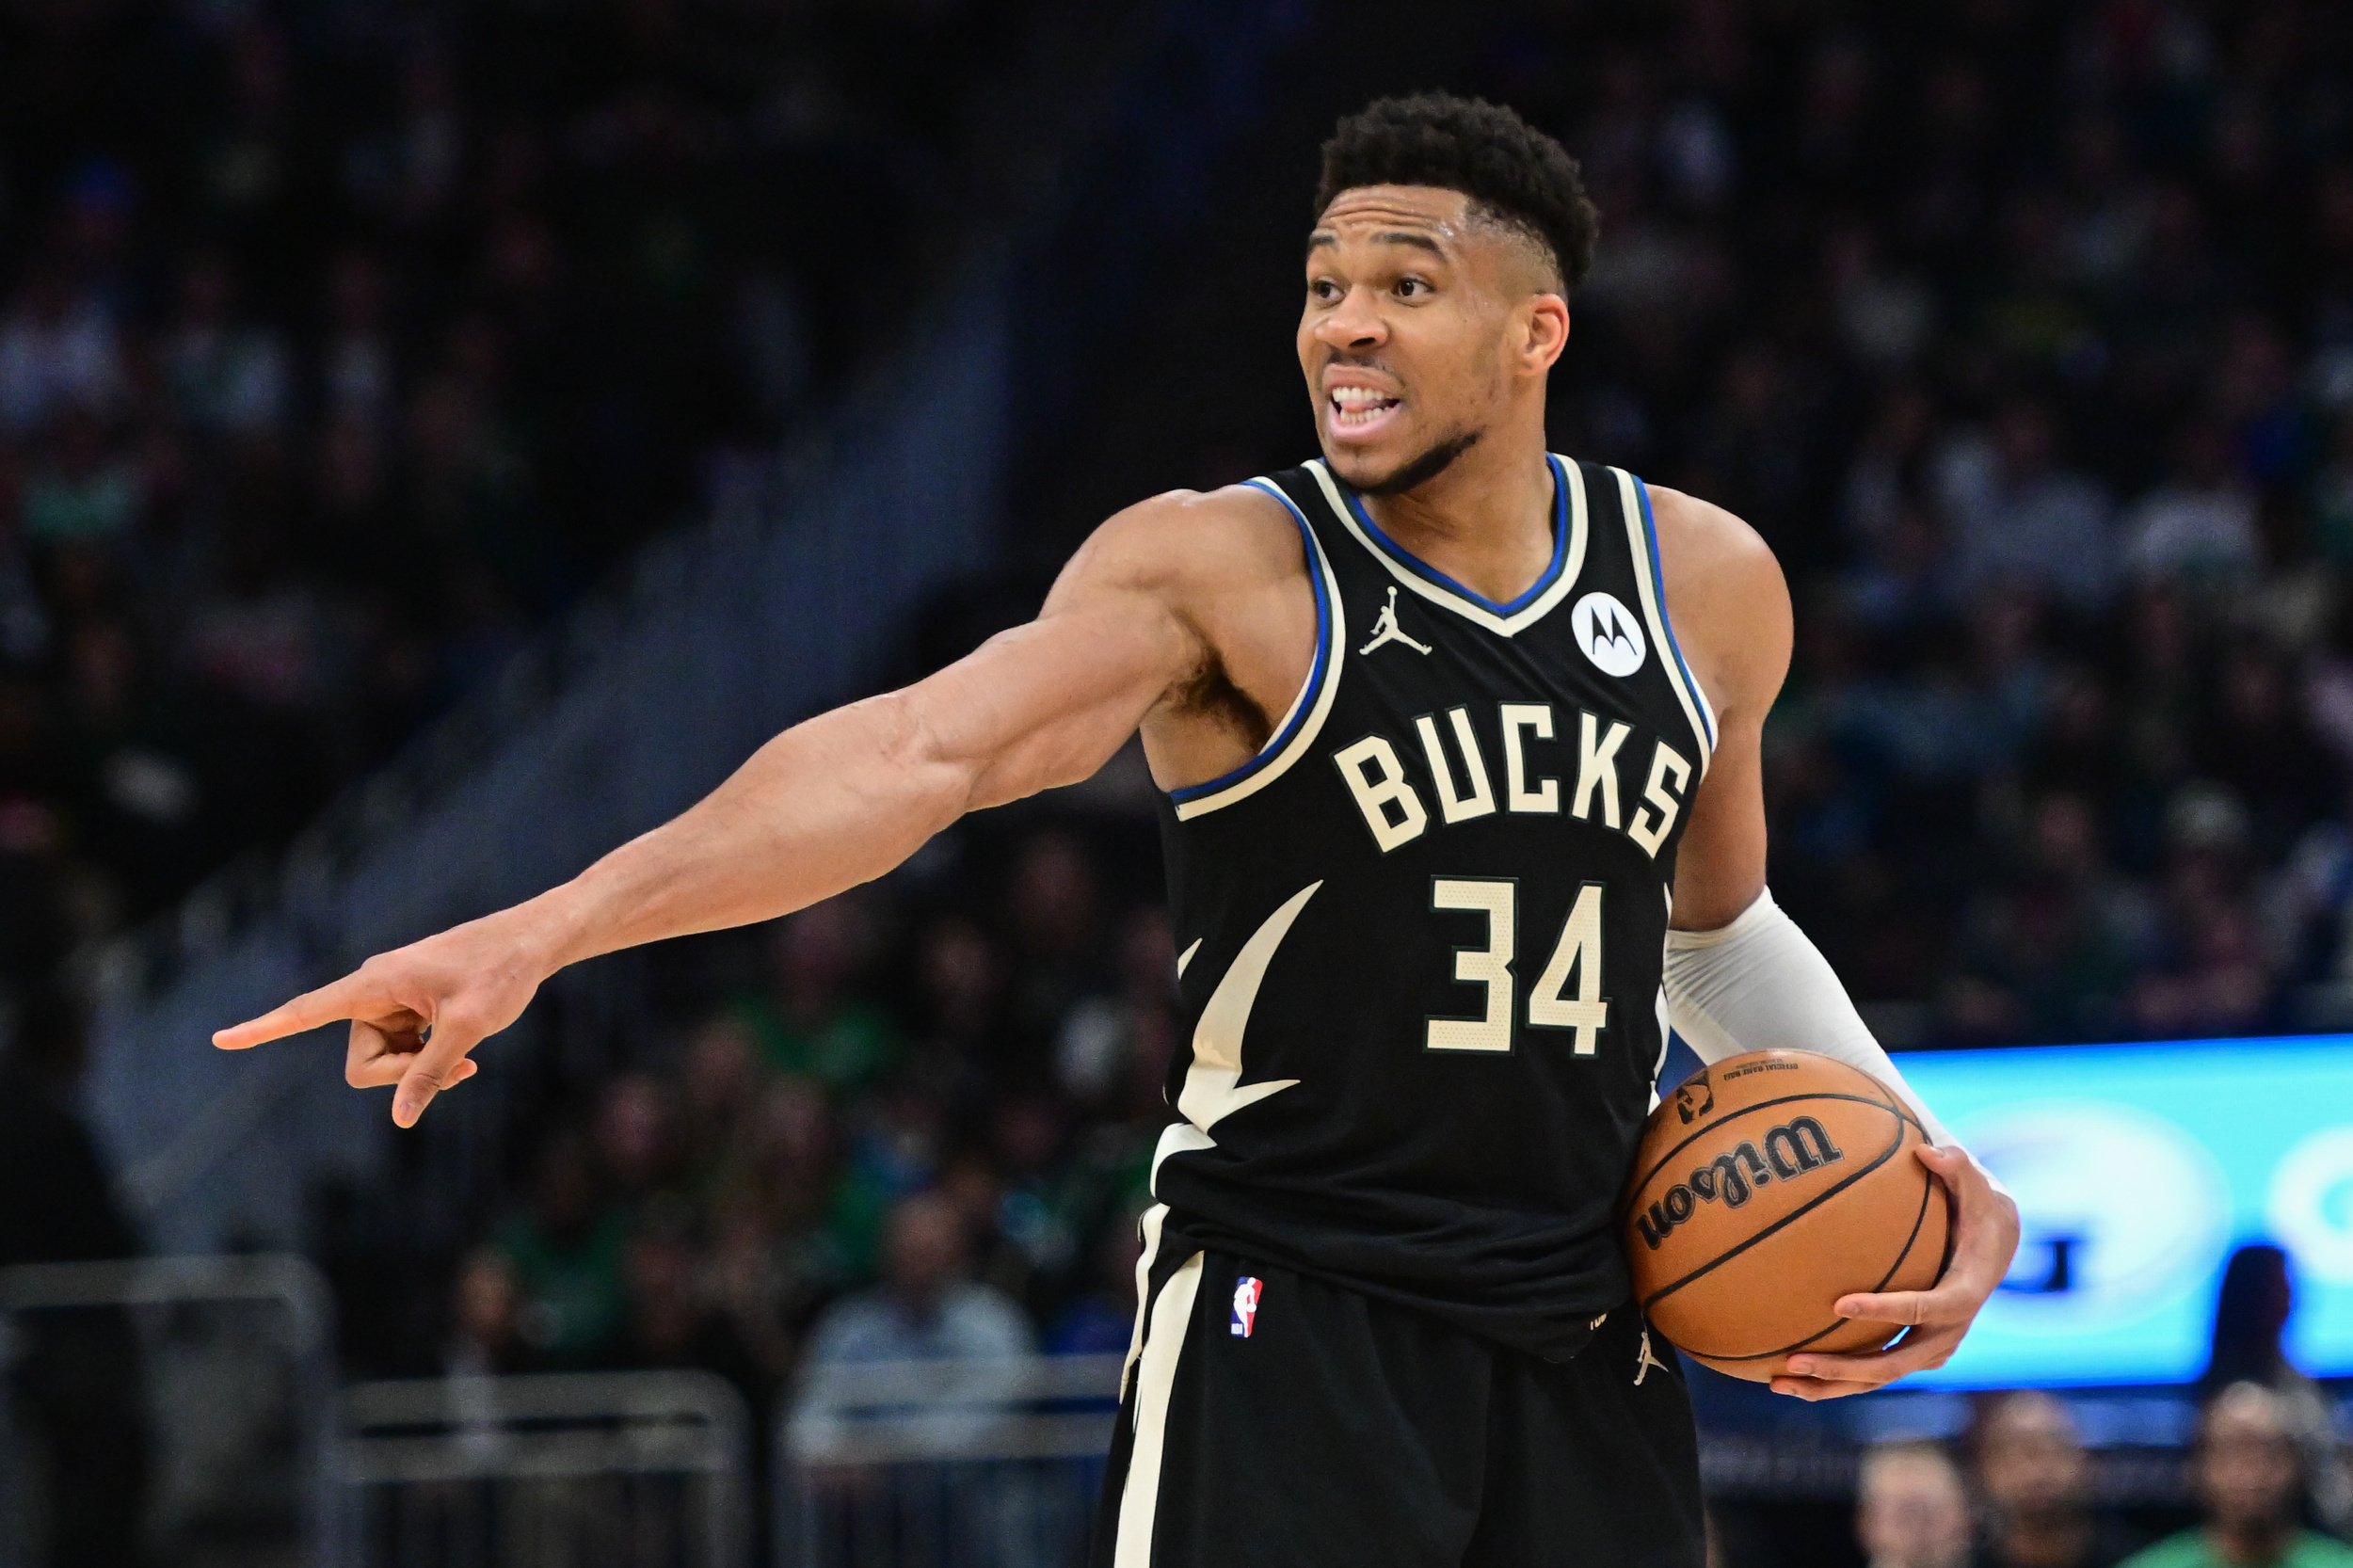 report reveals giannis antetokounmpo’s status for game 1 against pacers